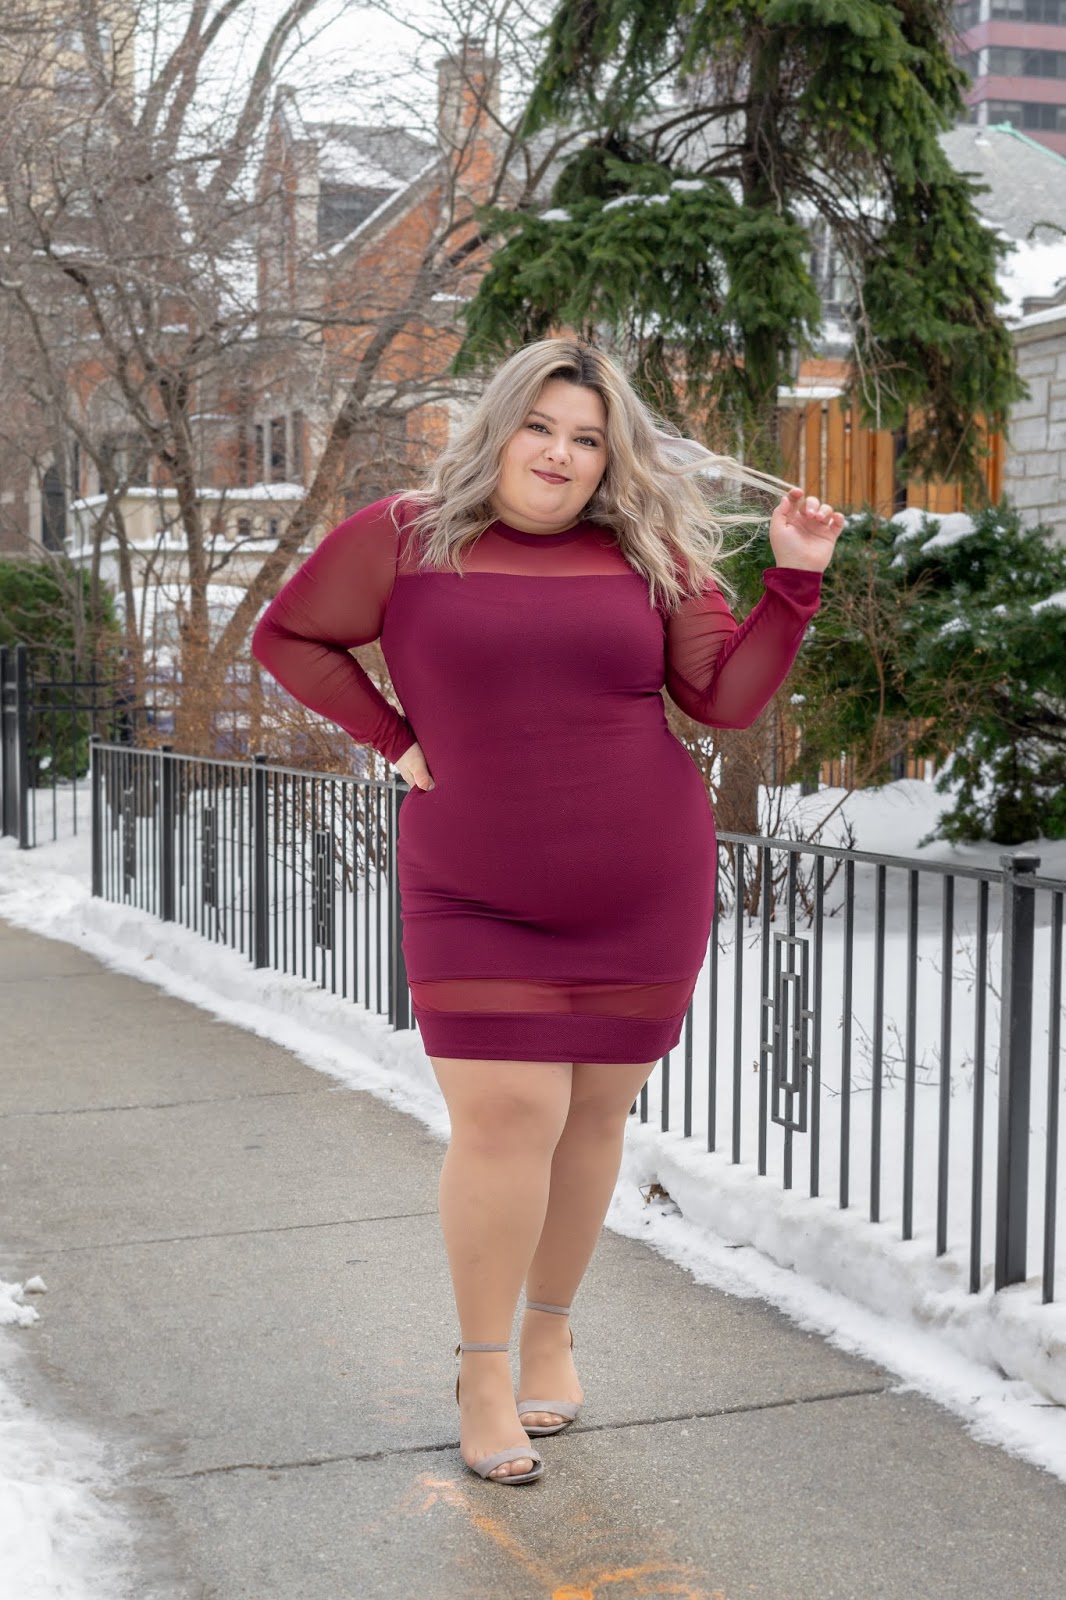 Chicago Plus Size Petite Fashion Blogger, YouTuber, and model Natalie Craig, of Natalie in the City, reviews Fashion Nova Curve's Pretty Young Thang Dress.